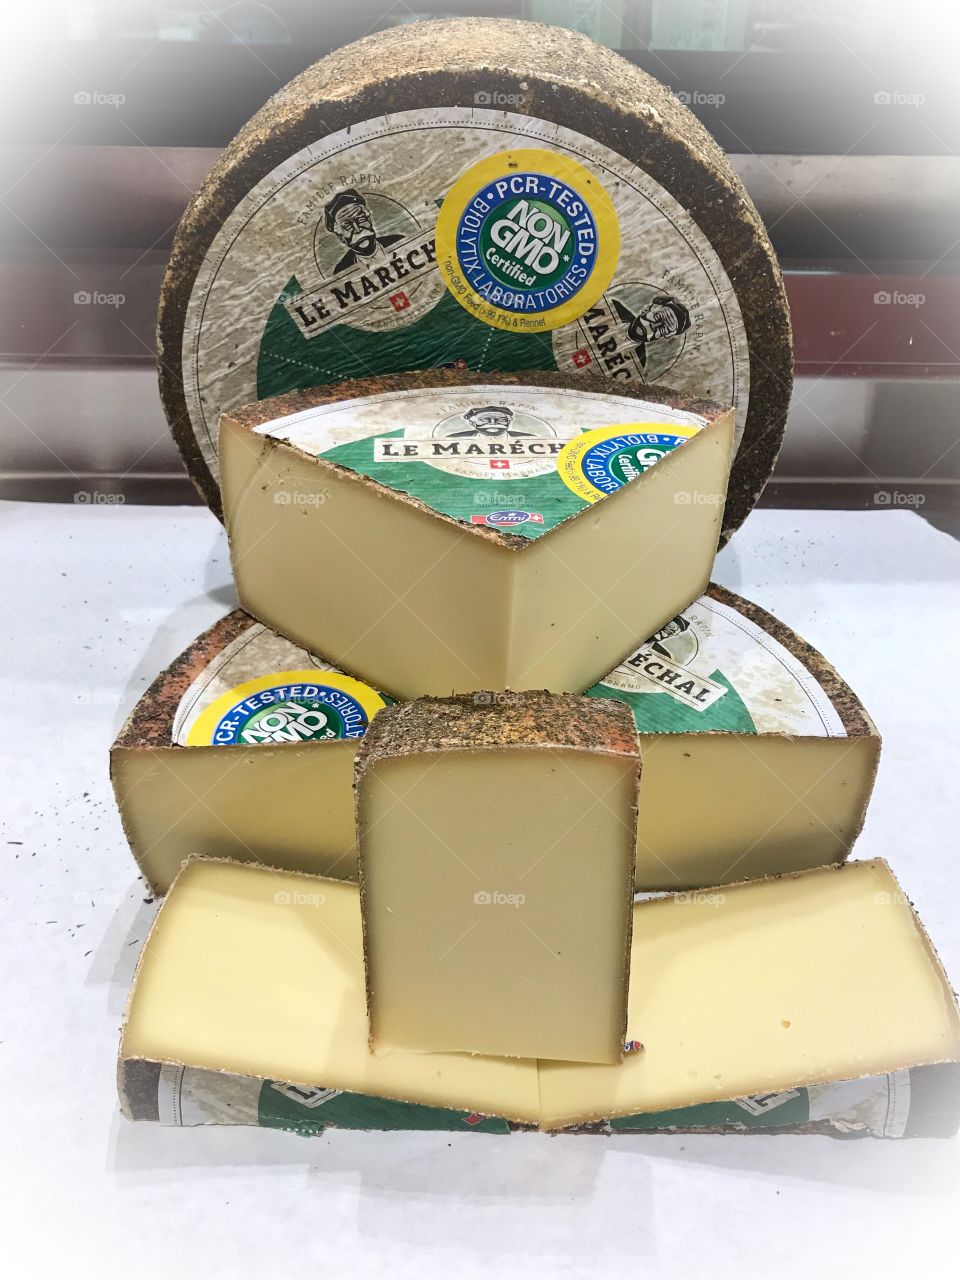 Le Marechal Cheese